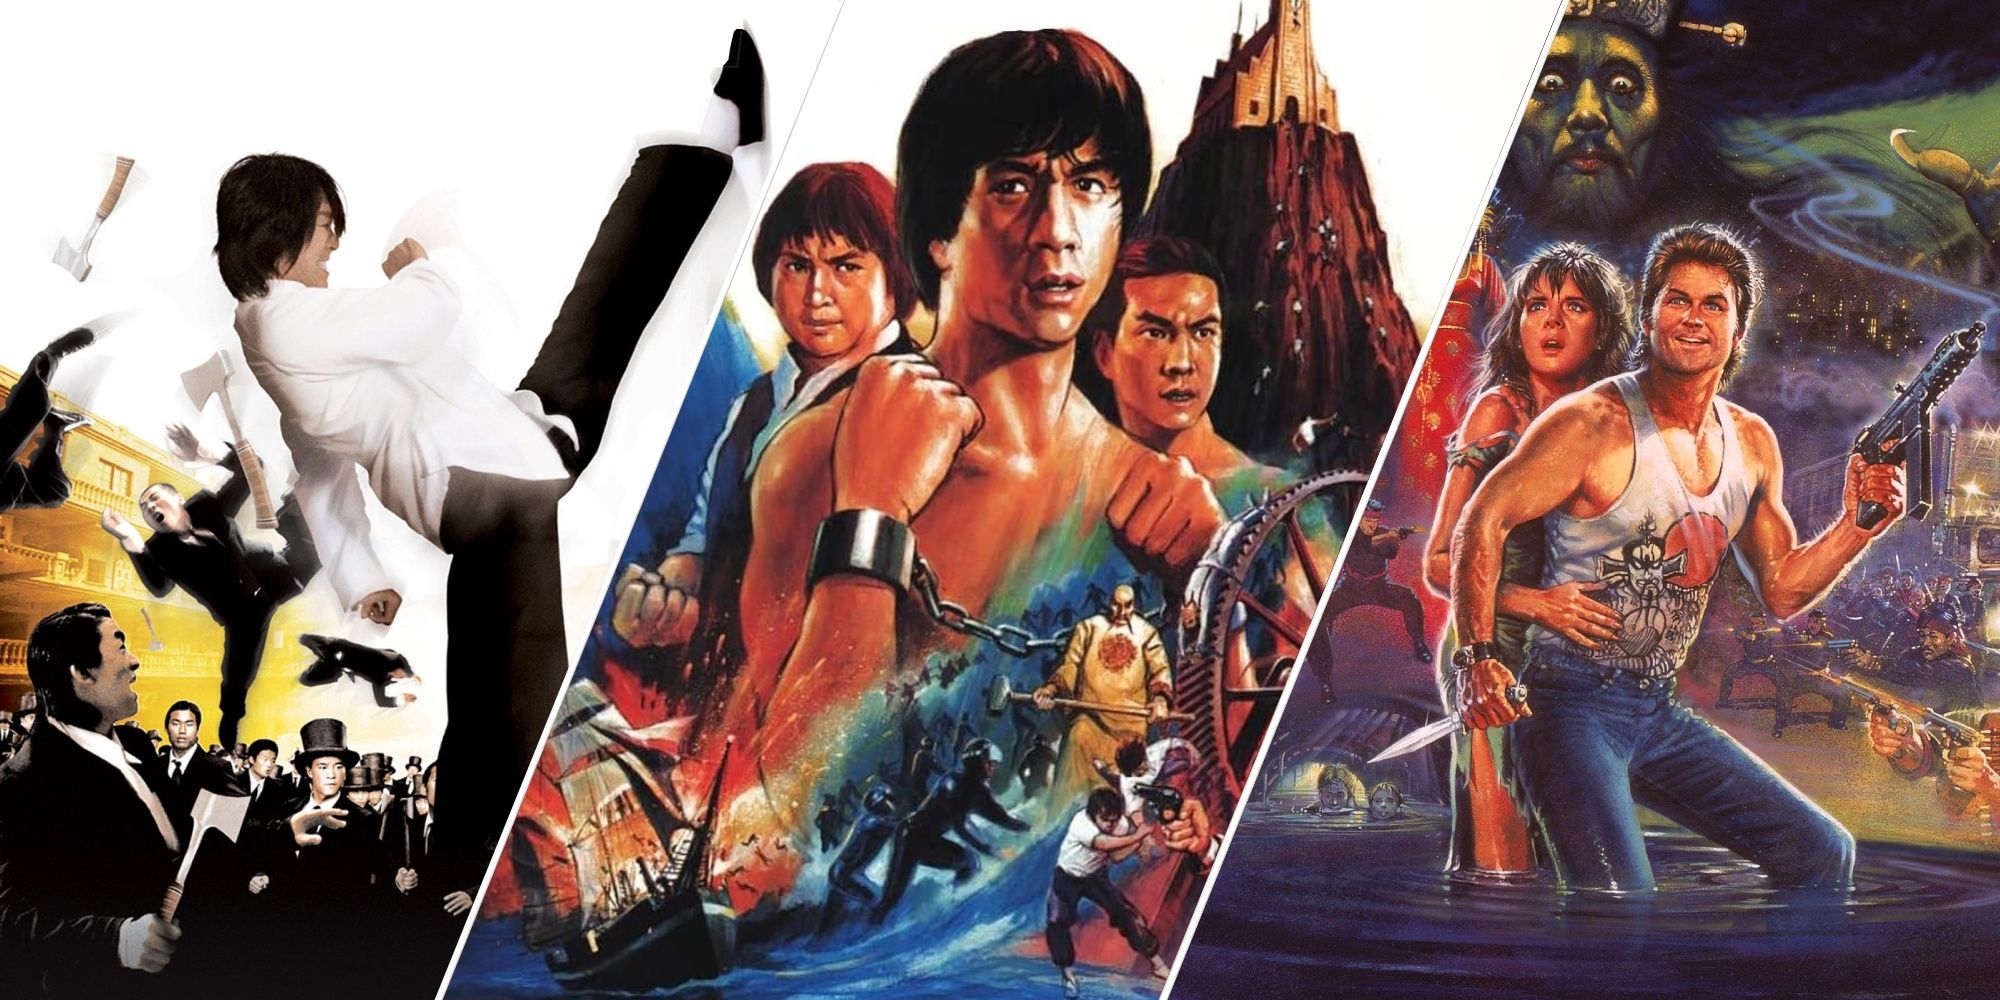 10 Great Martial Arts Movies That Blend Action With Hilarious Comedy